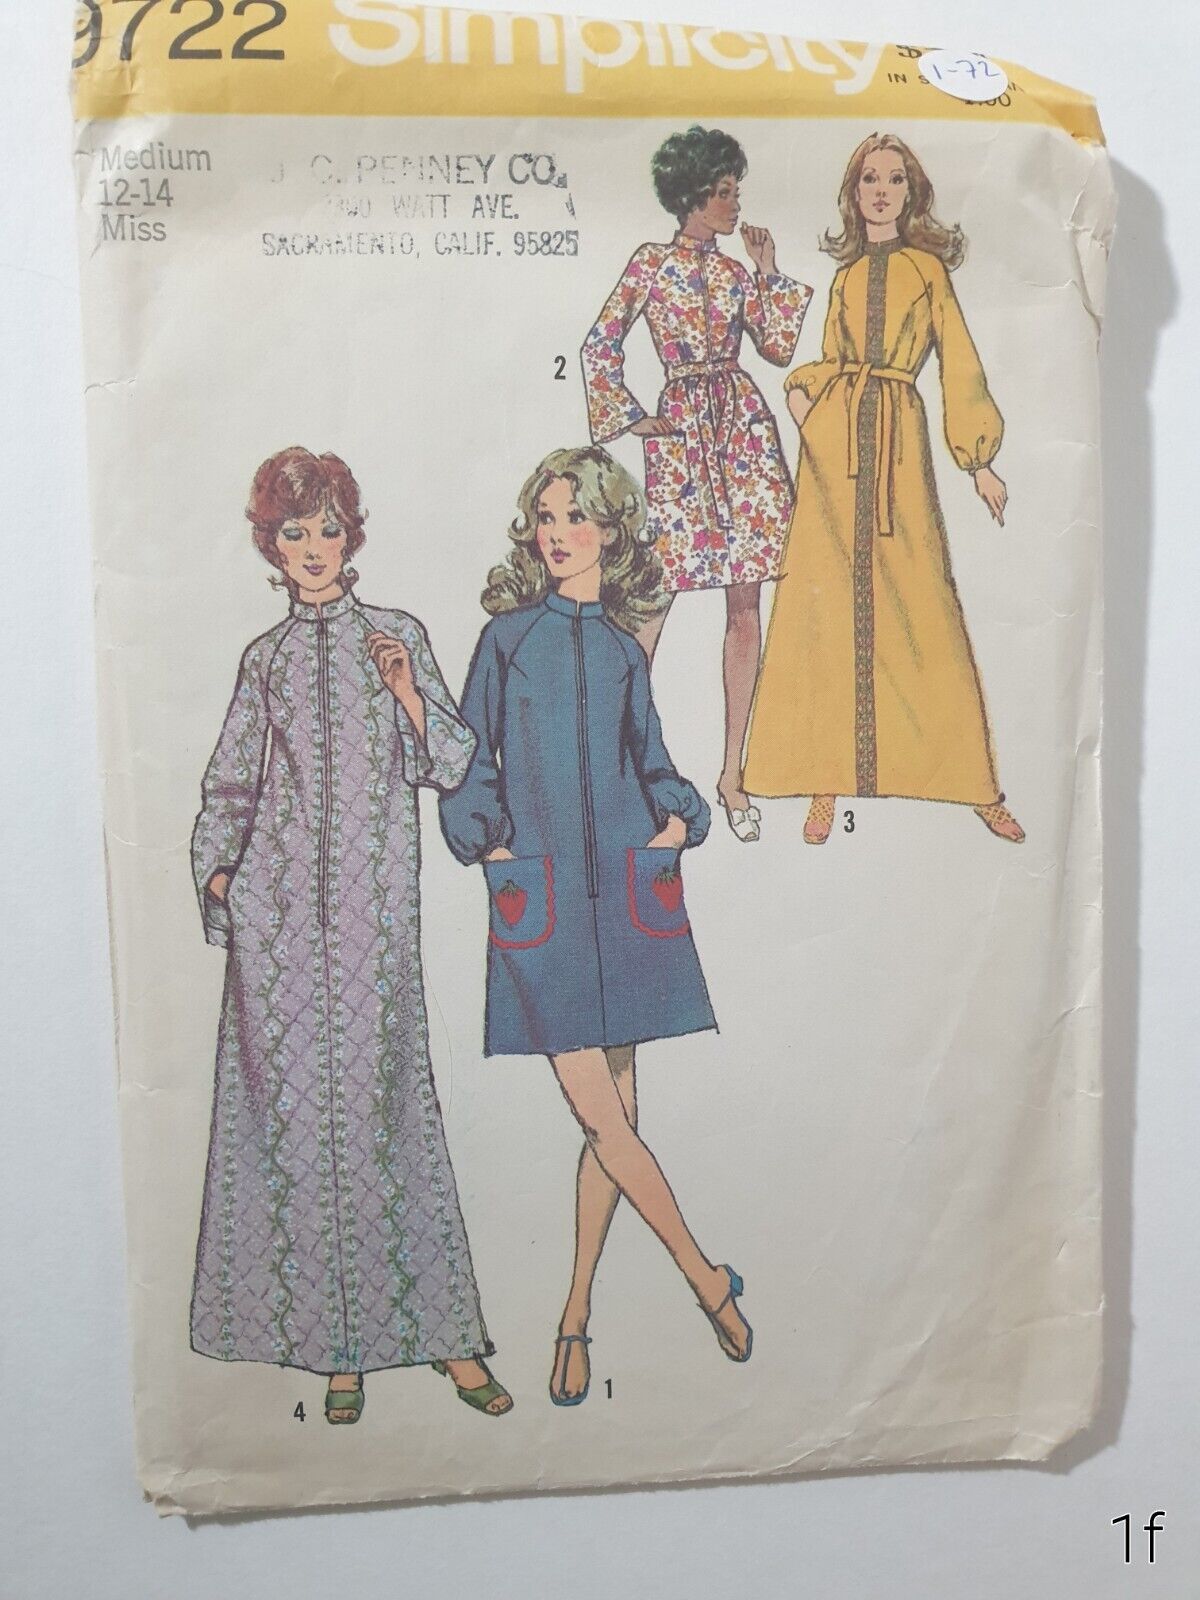 Simplicity 9722 Vintage 1971 Robes Sewing Pattern Size 12-14 Uncut